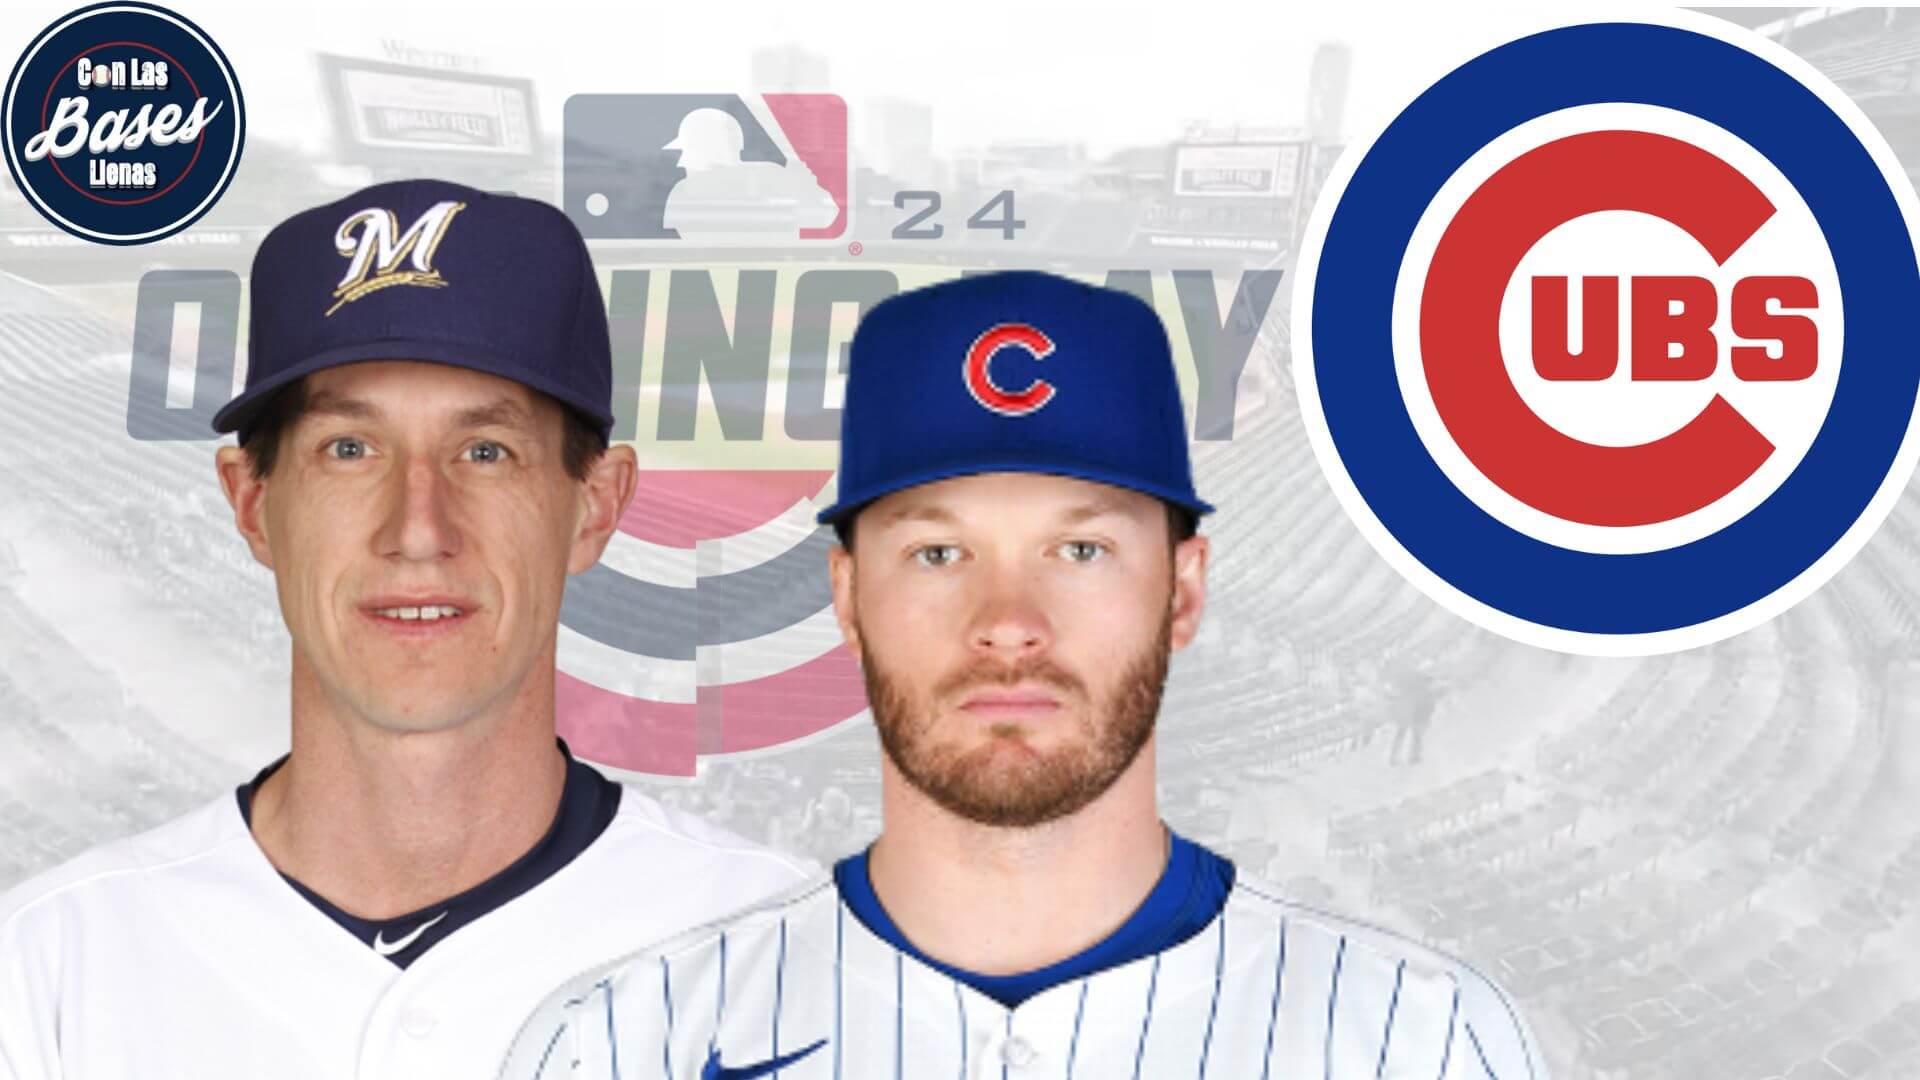 Cubs: Craig Counsell define a su primer bat del Opening Day